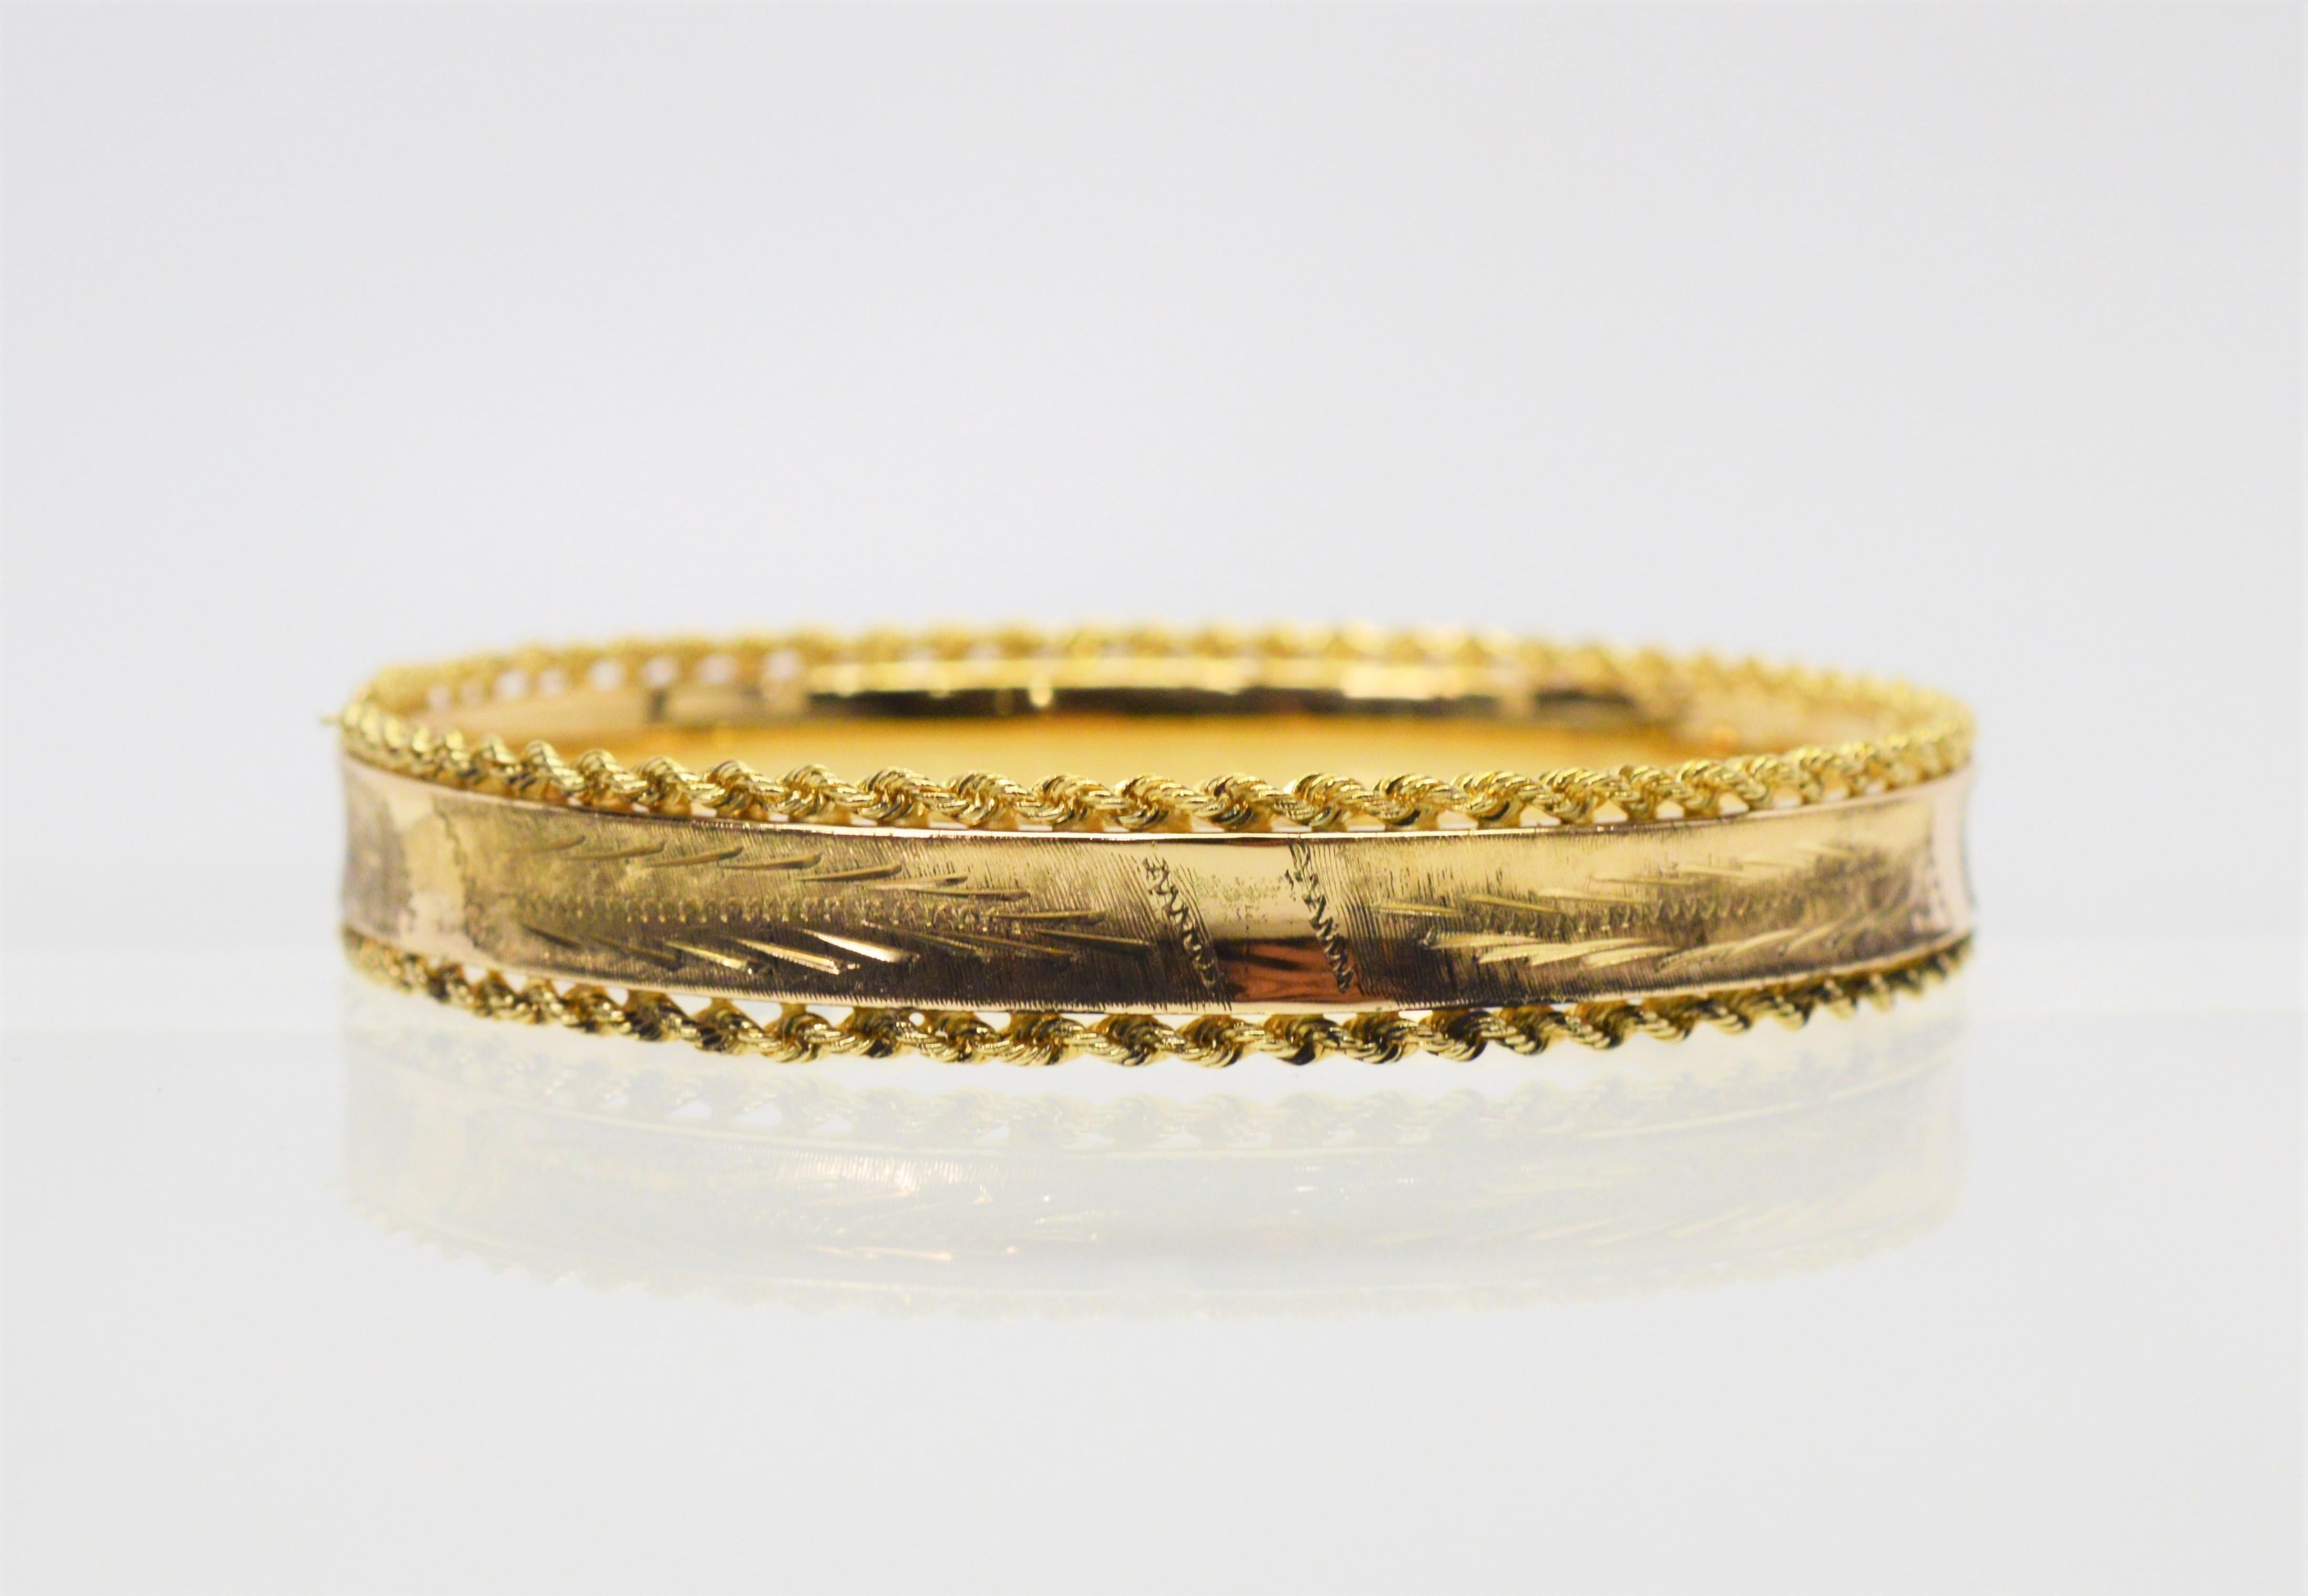 Fourteen karat yellow gold and trimmed with a pretty rope chain detail, this circa 1960's bangle bracelet is engraved with a wheat design, known as a symbol of abundance, life and fertility.  The diameter is 2-3/8 x 2 inches and the bracelet is